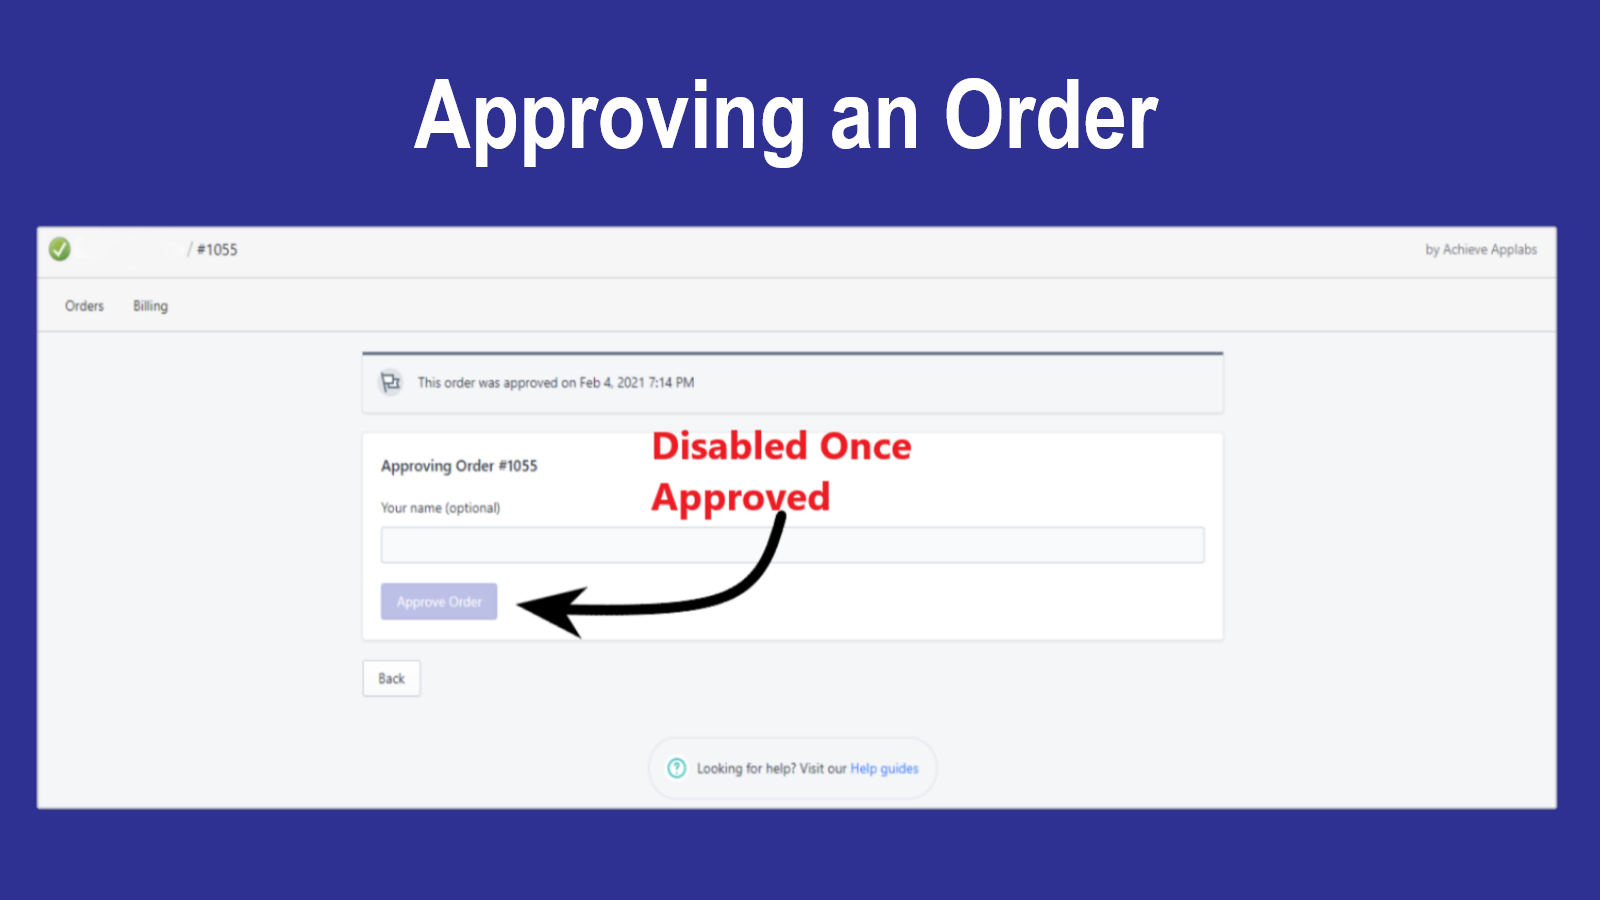 image of approving an order screen